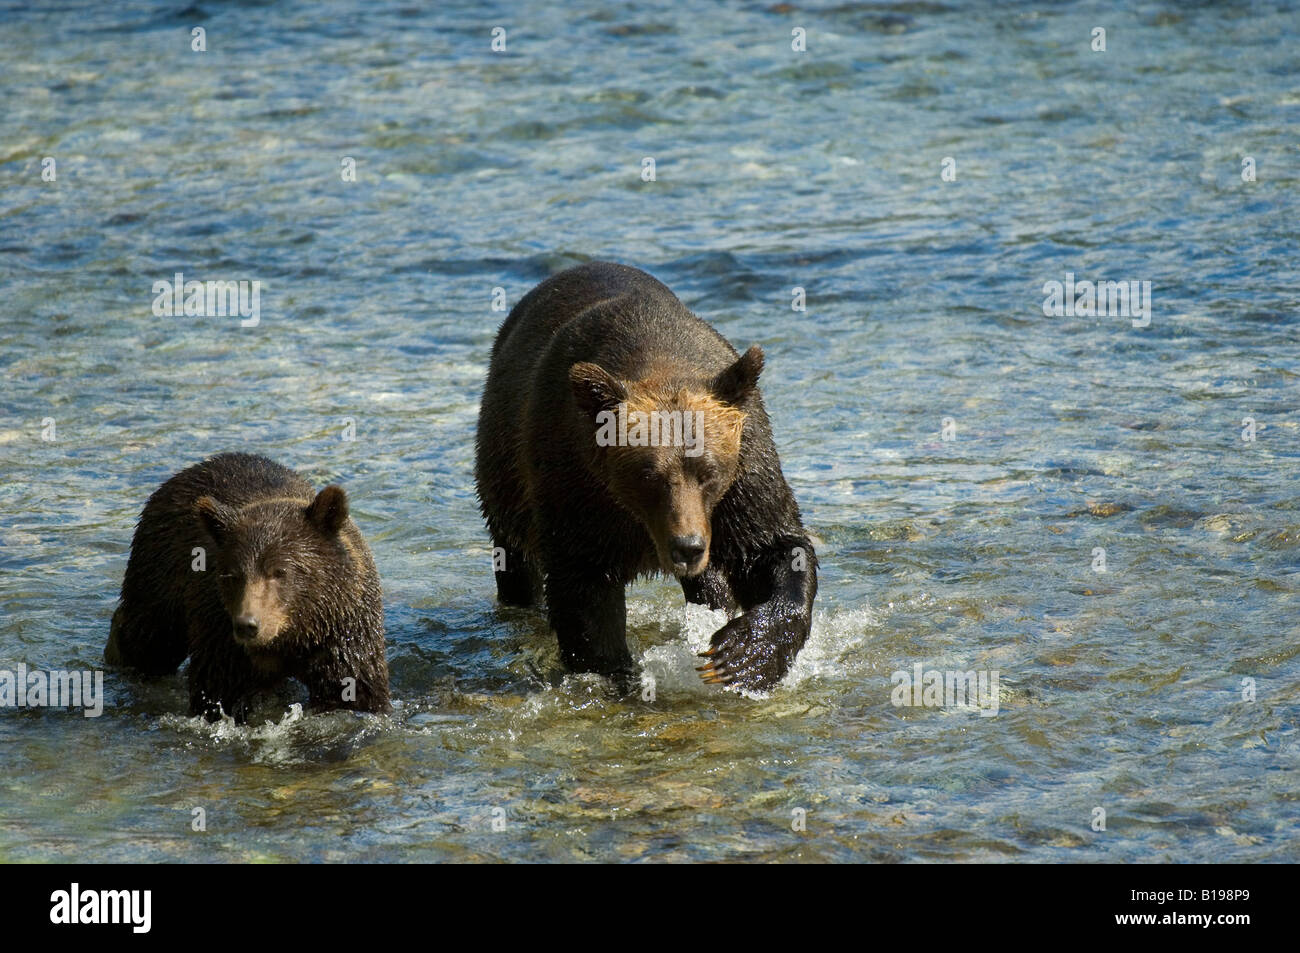 Grizzly Bear (Ursus arctos) Female  with Yearling walking in Salmon Spawning stream. Fish Creek Tongass National Forest, Alaska, Stock Photo